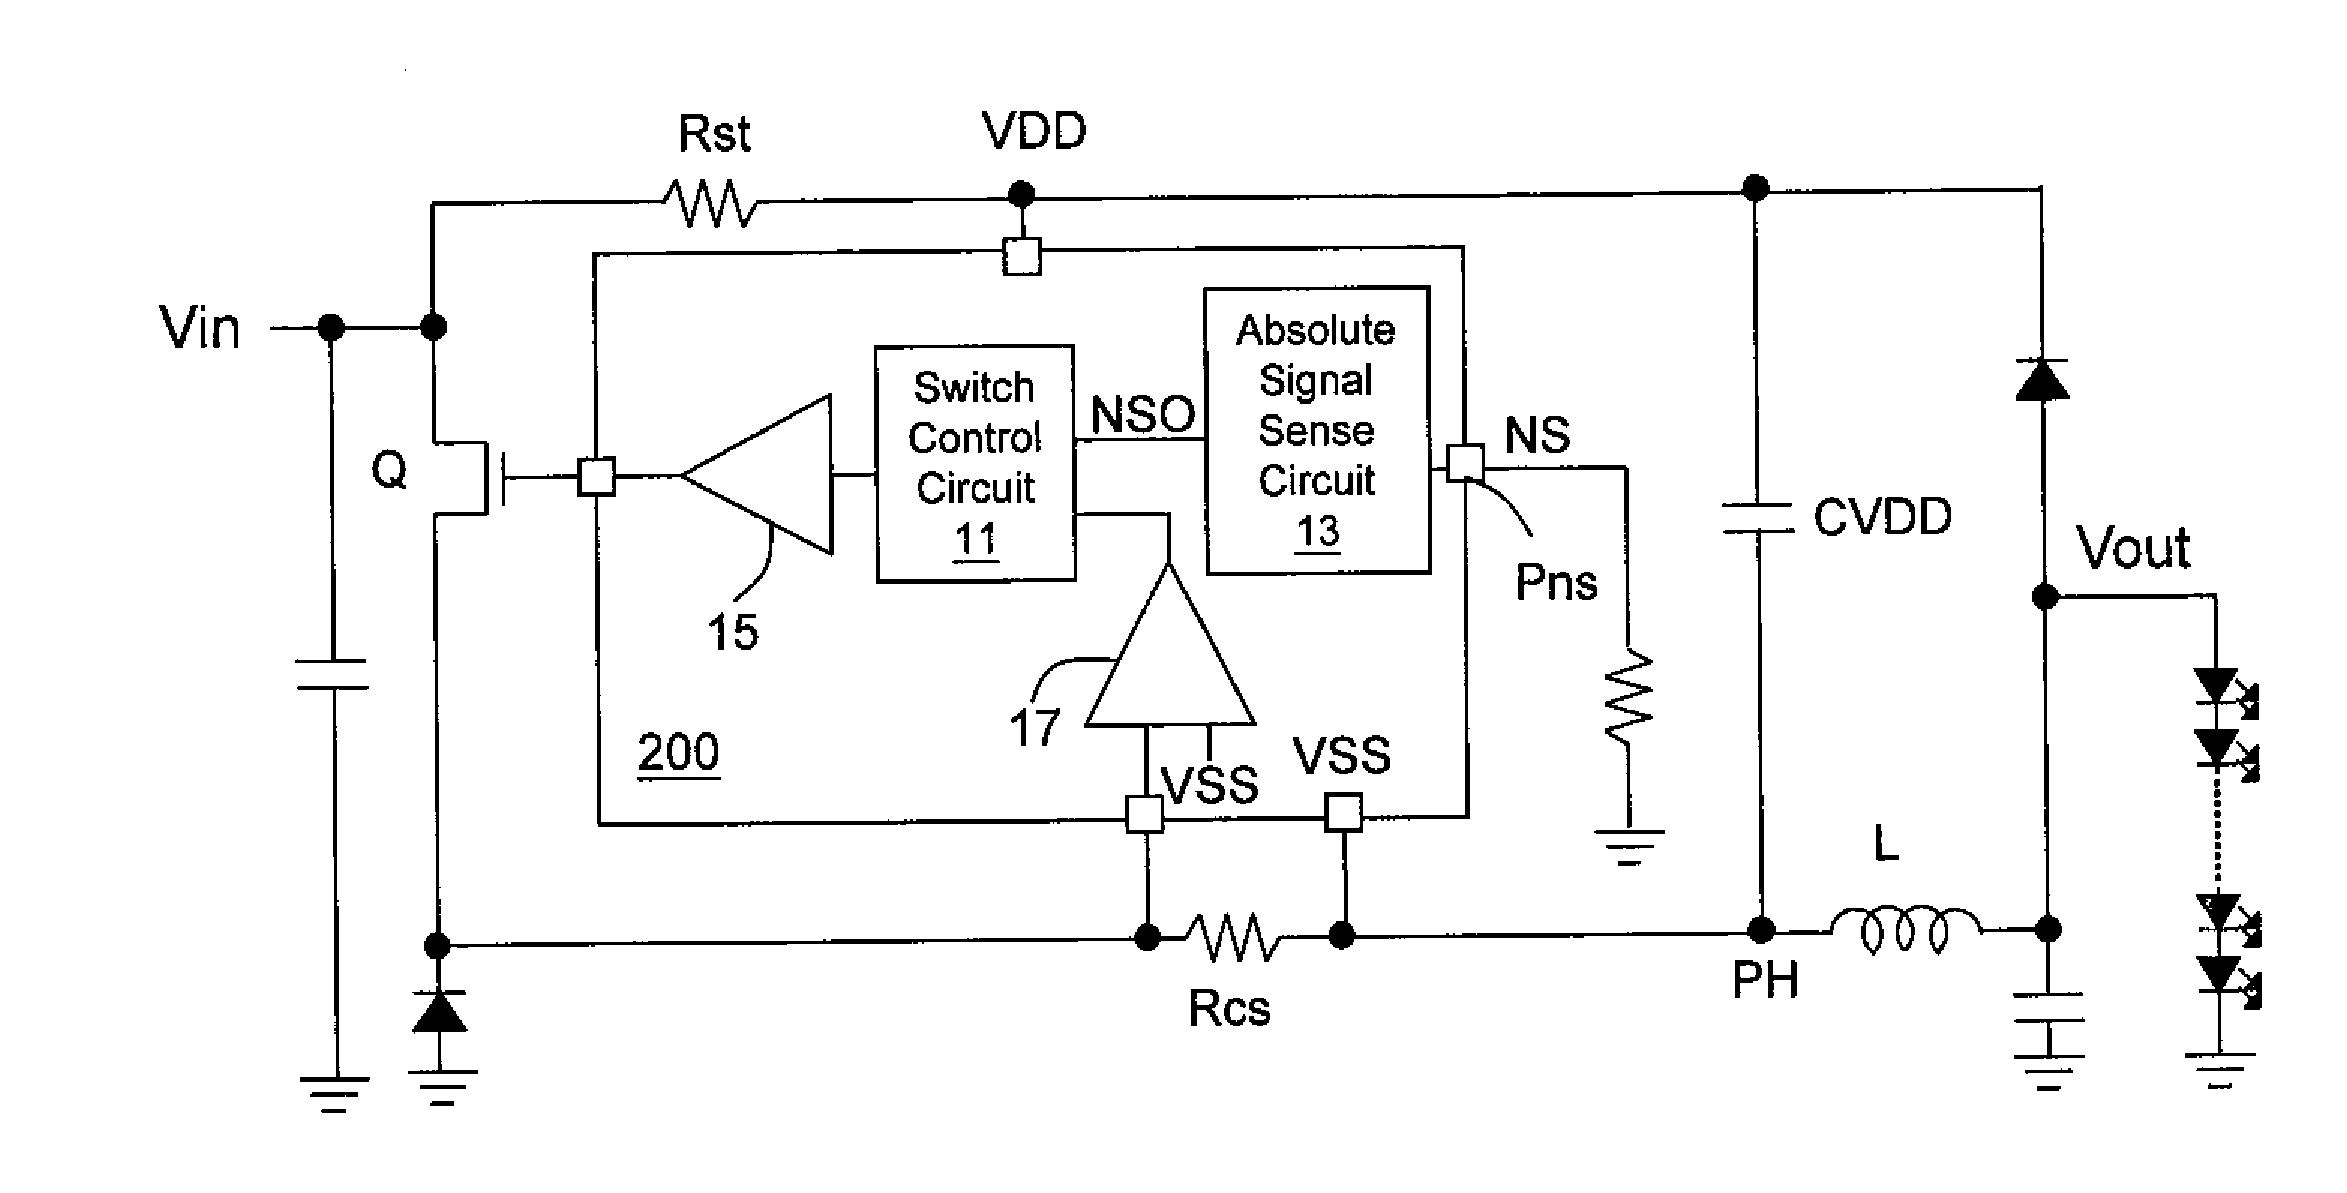 Circuit and method for providing absolute information for floating grounded integrated circuit